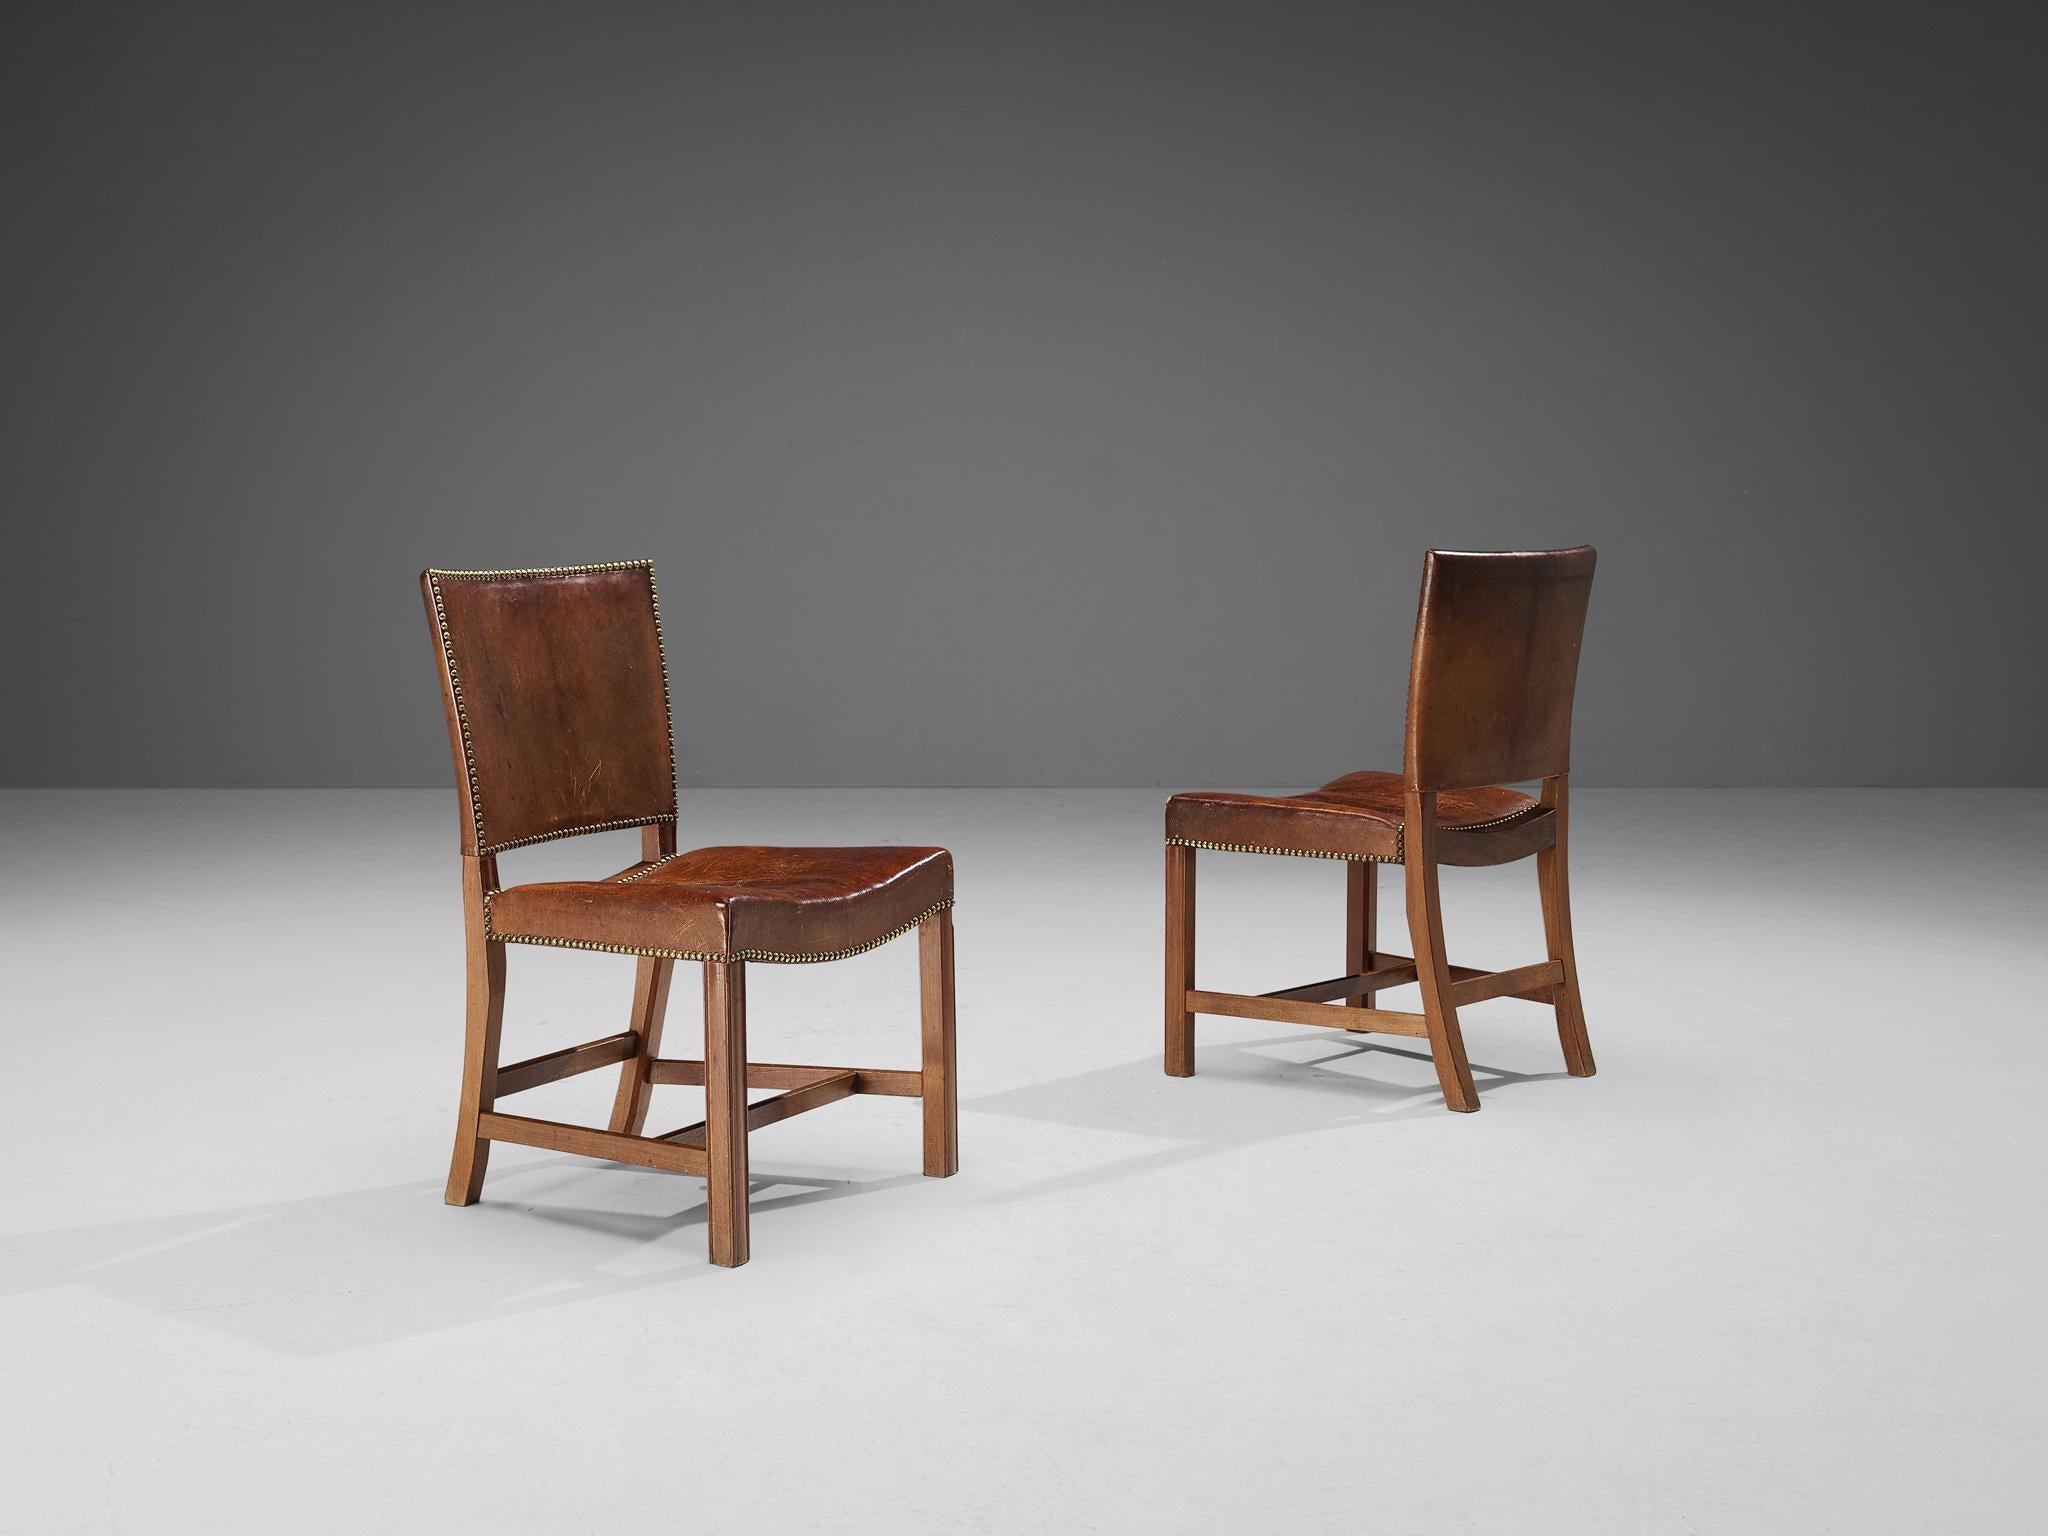 Kaare Klint for Rud Rasmussen, pair of dining chairs, 'The Red Chair', model 3758, original Niger leather, mahogany, brass, Denmark, designed 1927, manufactured 1930s

These dining chairs in brown leather upholstery are designed in 1927 and